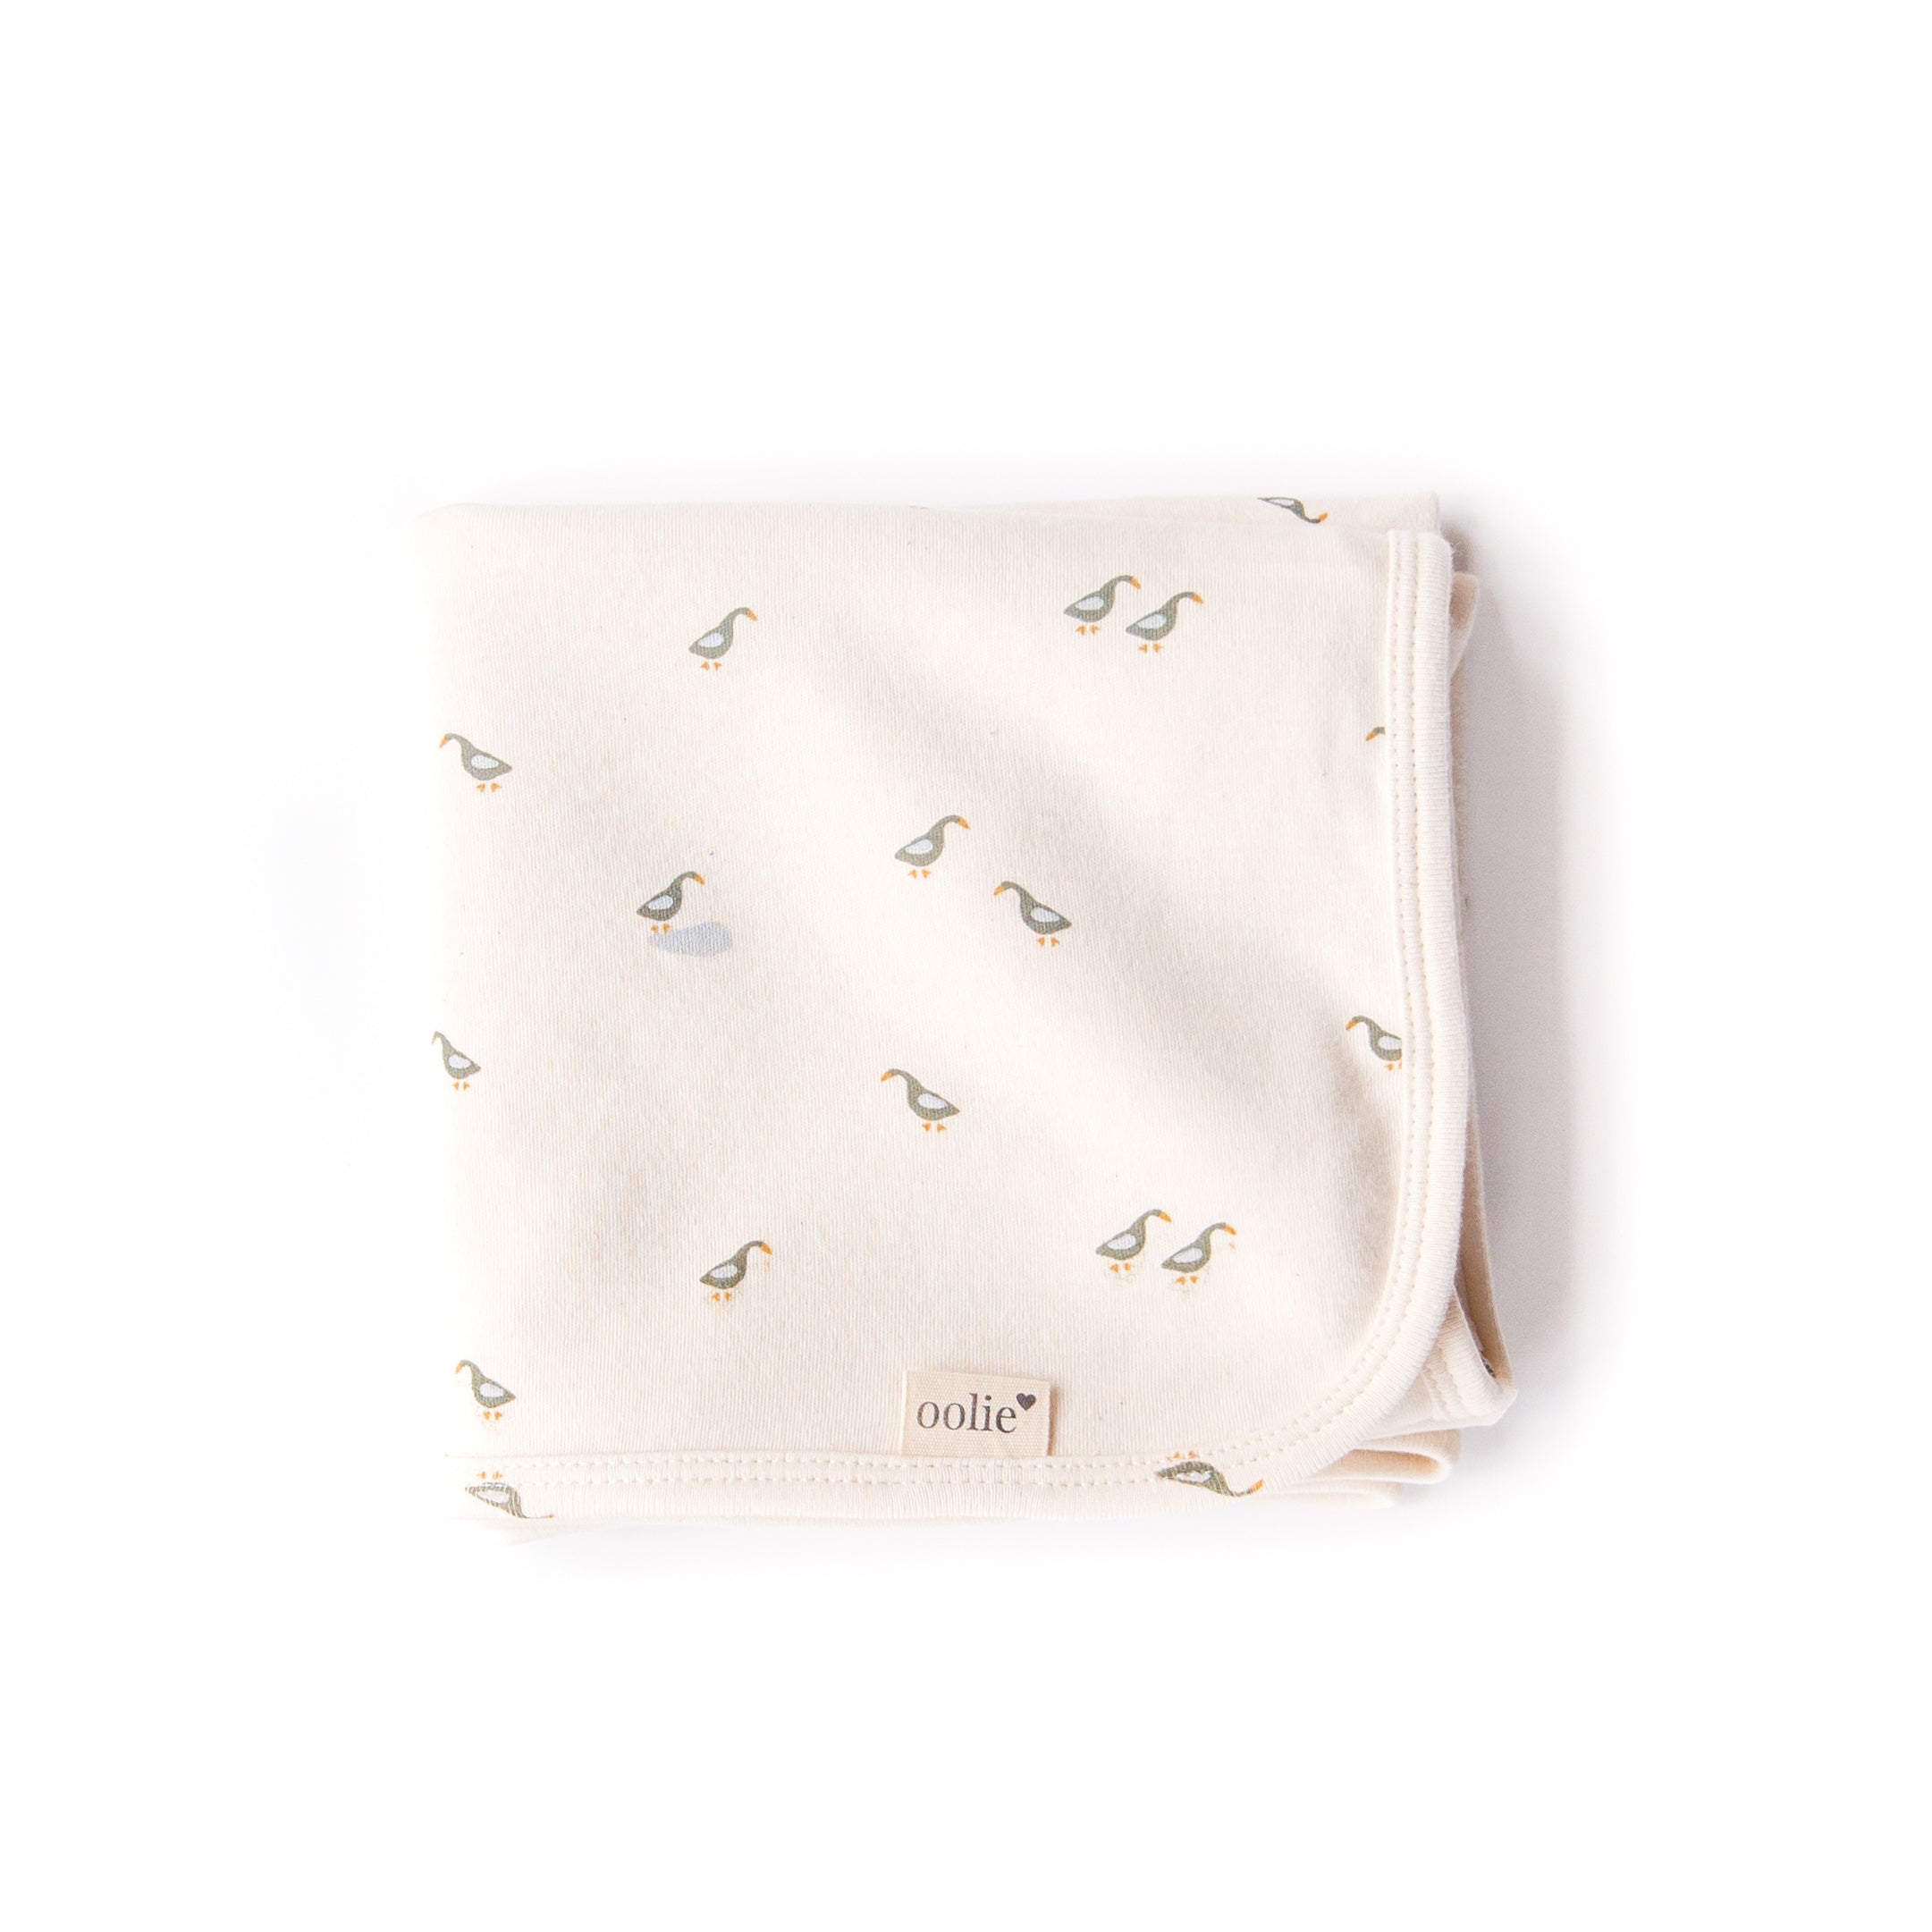 An Oolie organic cotton baby blanket with the runner ducks print, a natural color with small green and blue ducks in a repeating pattern.